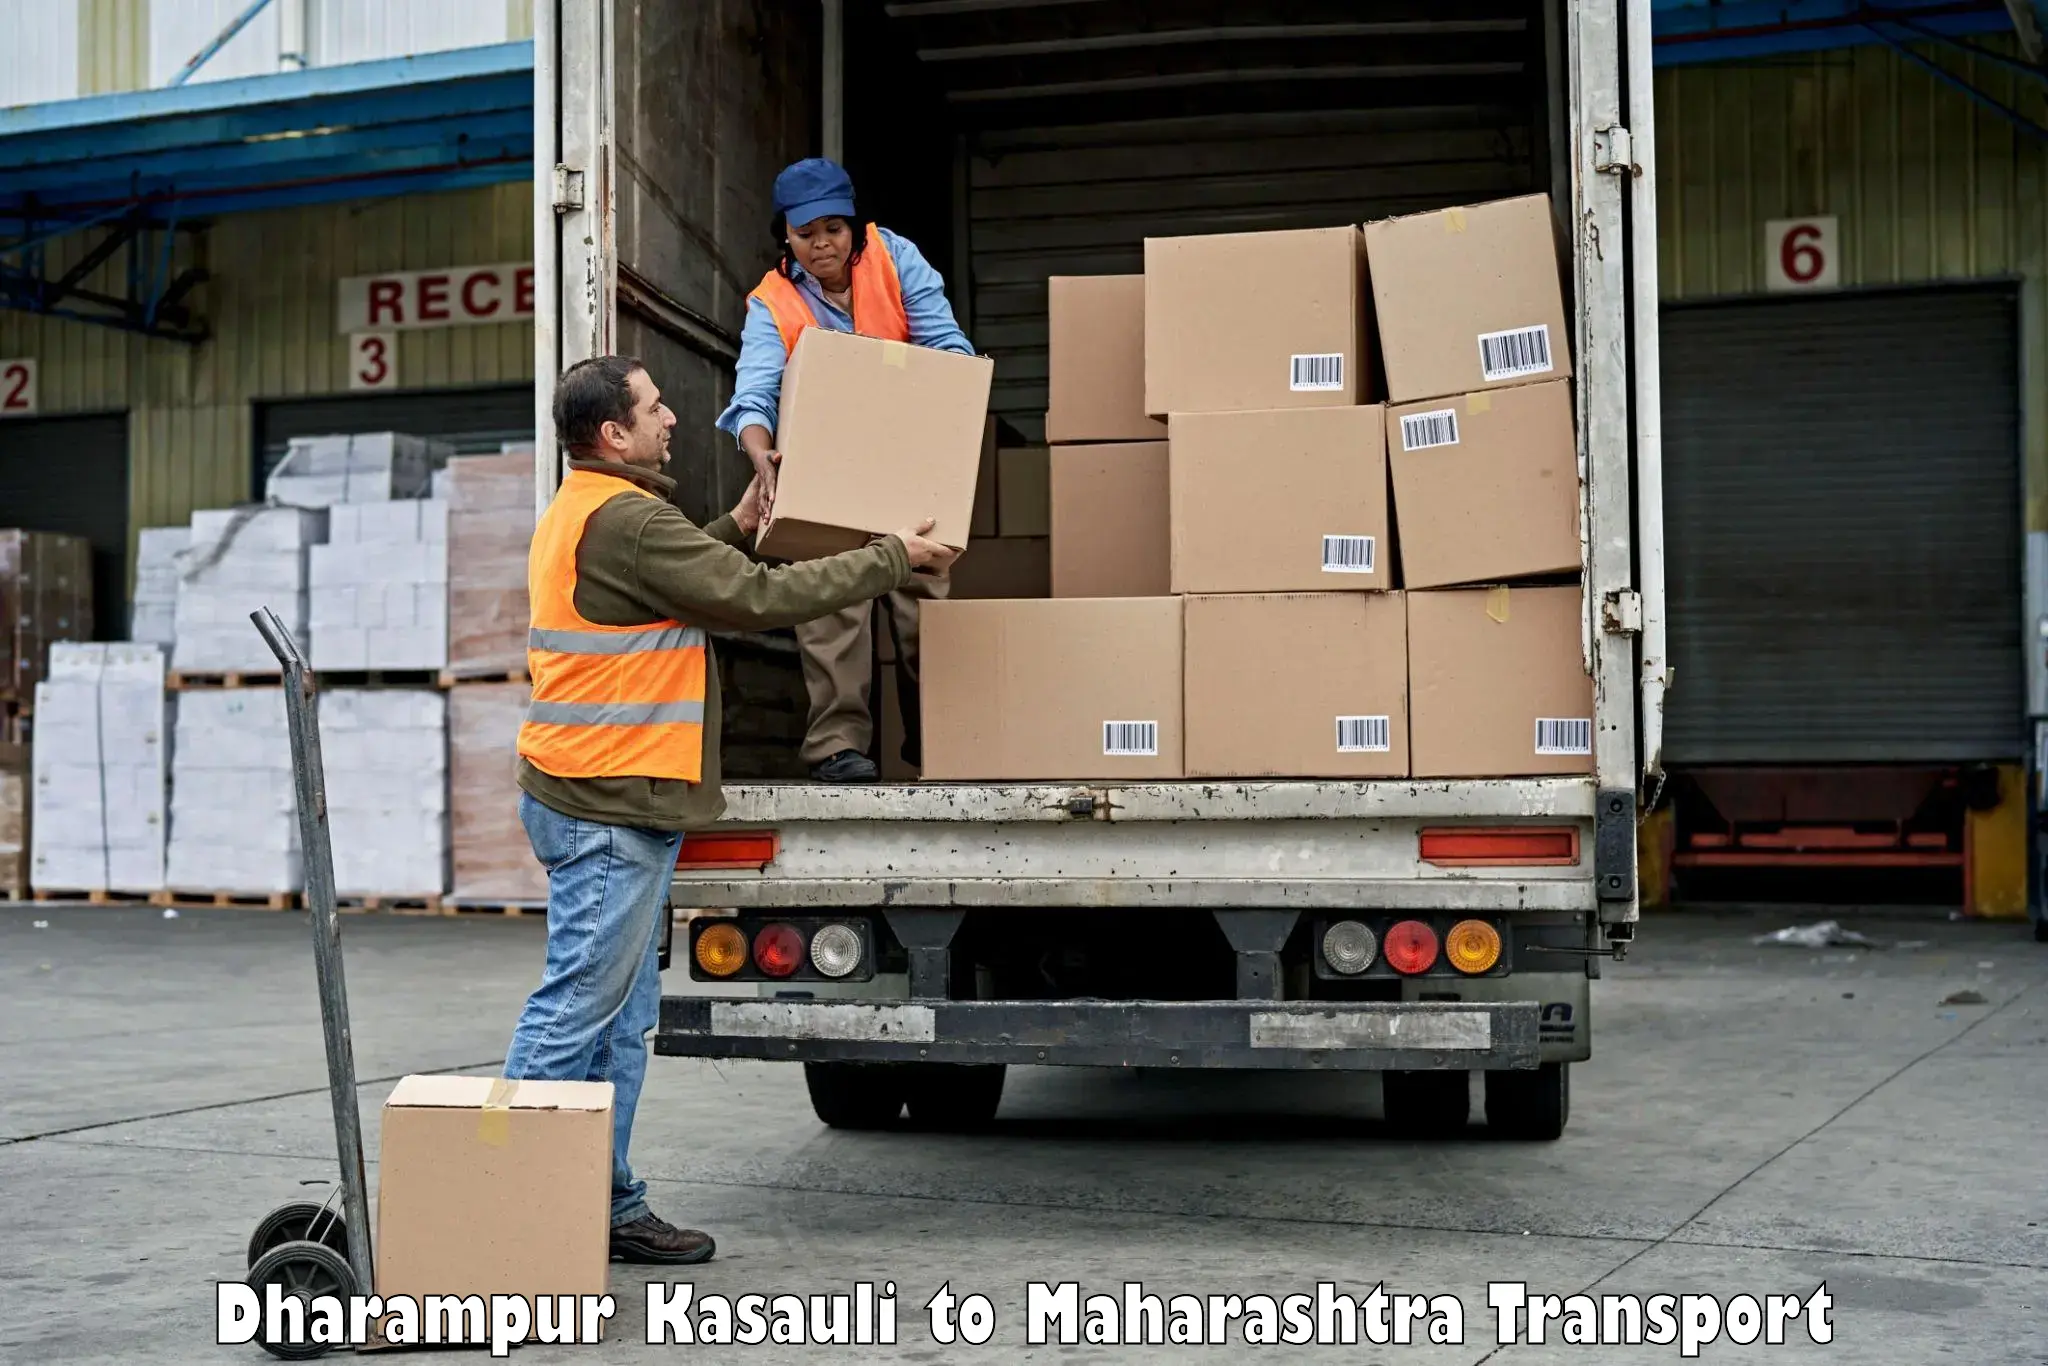 Material transport services Dharampur Kasauli to IIIT Nagpur